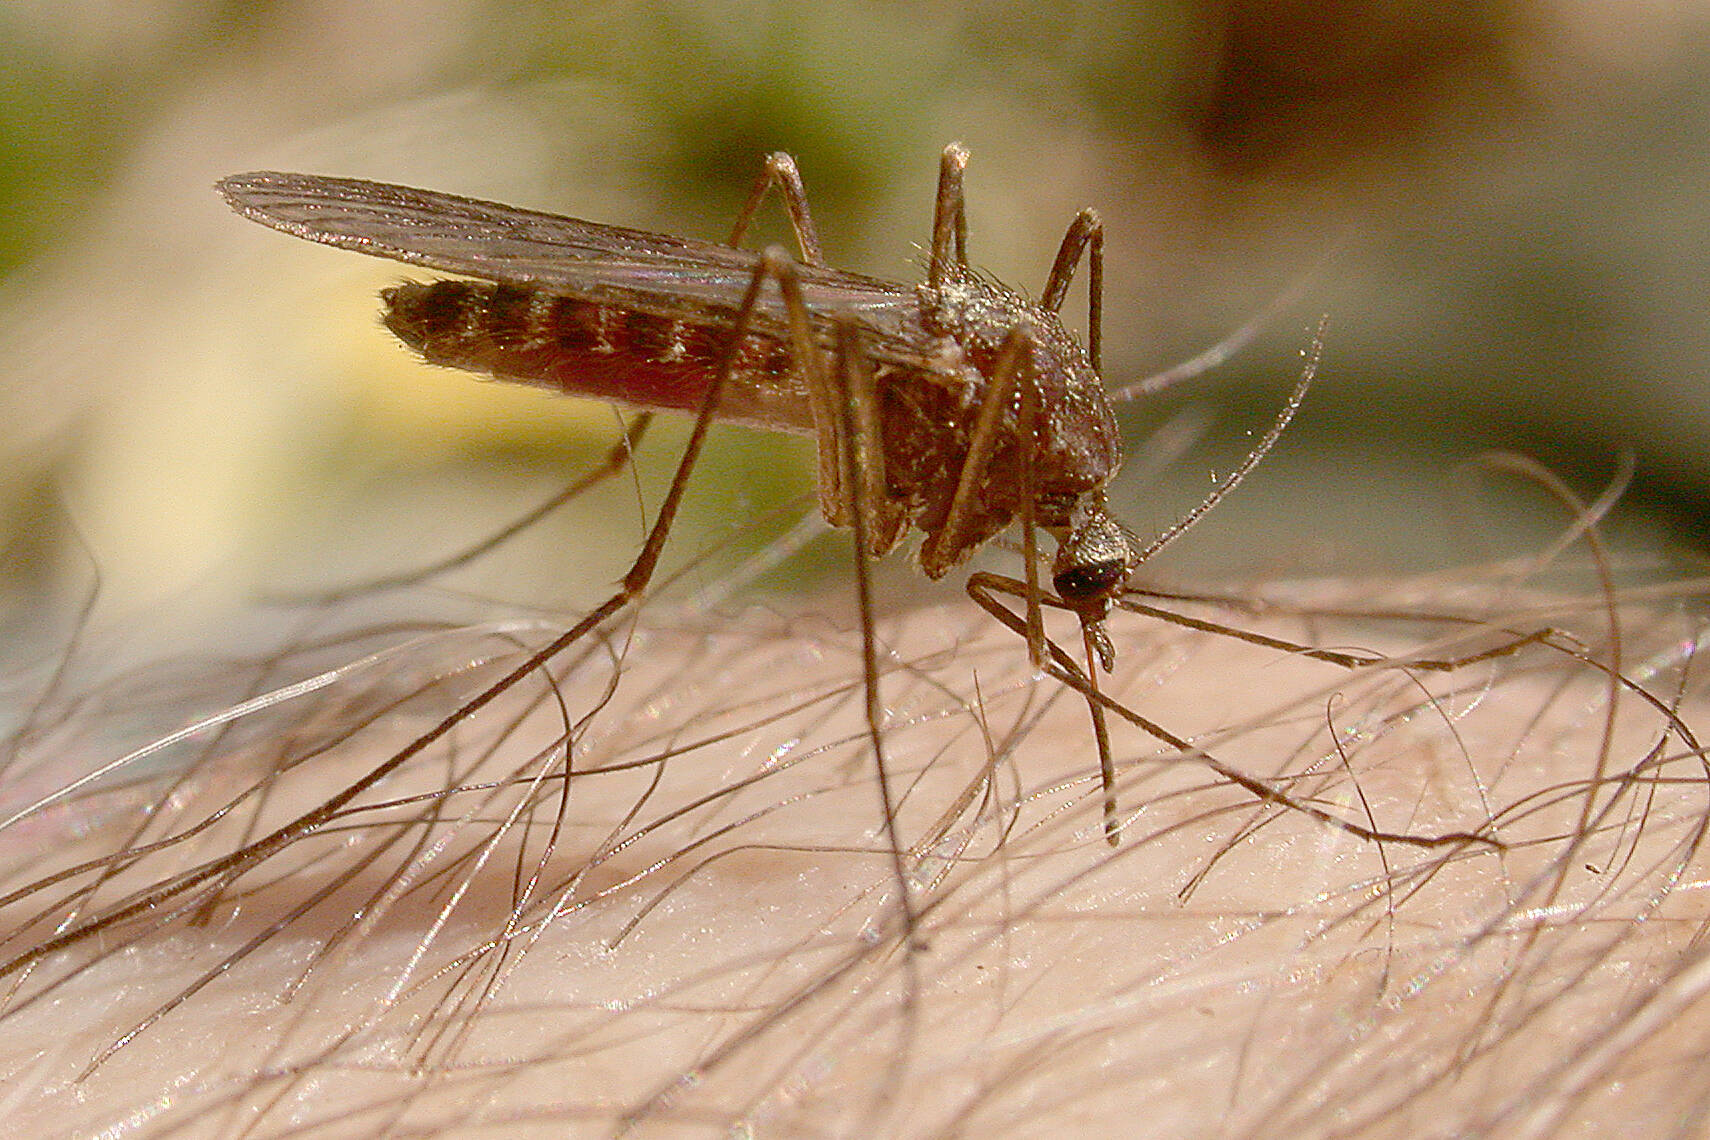 Female mosquitoes have complex mouthparts, with toothy maxillae that saw a hole in the host, an injection tube for saliva, and another tube for sucking up blood. (Courtesy Photo / Bob Armstrong)